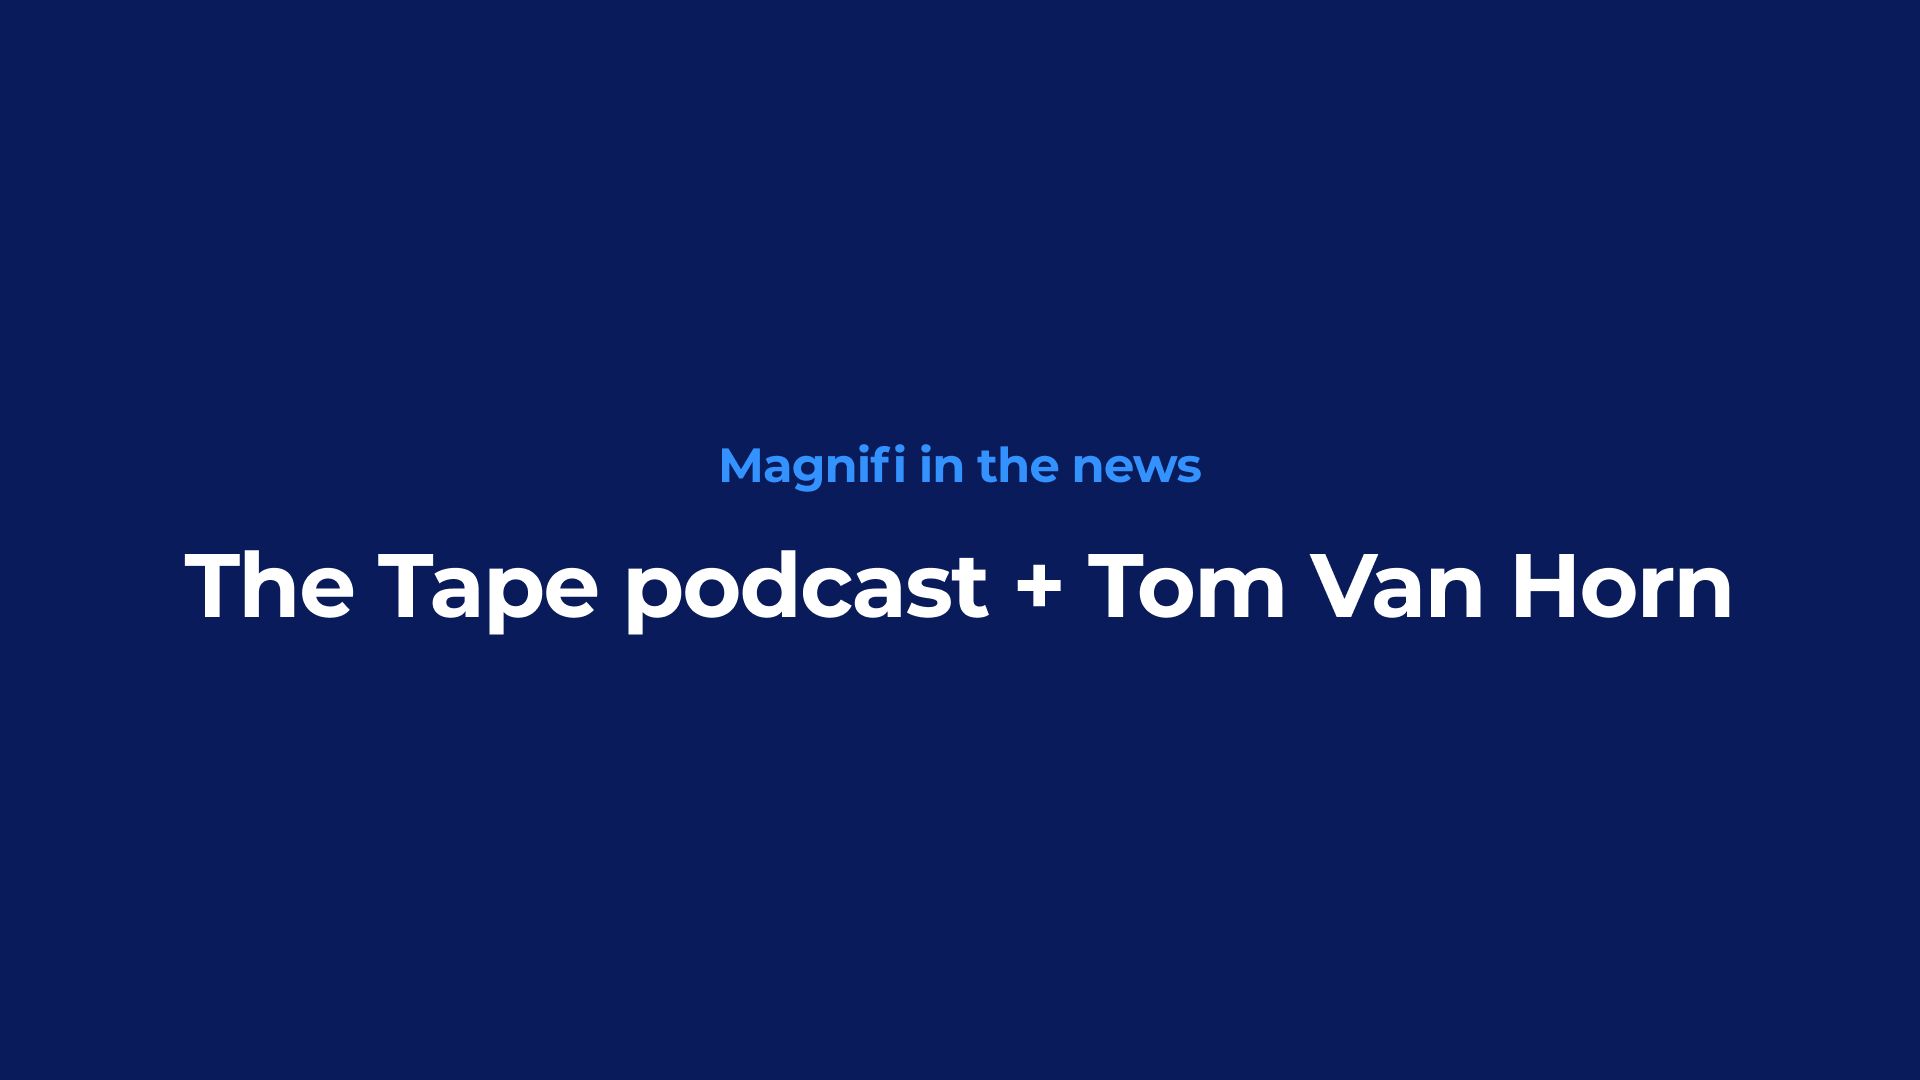 "Magnifi in the news
The Tape podcast + Tom Van Horn"